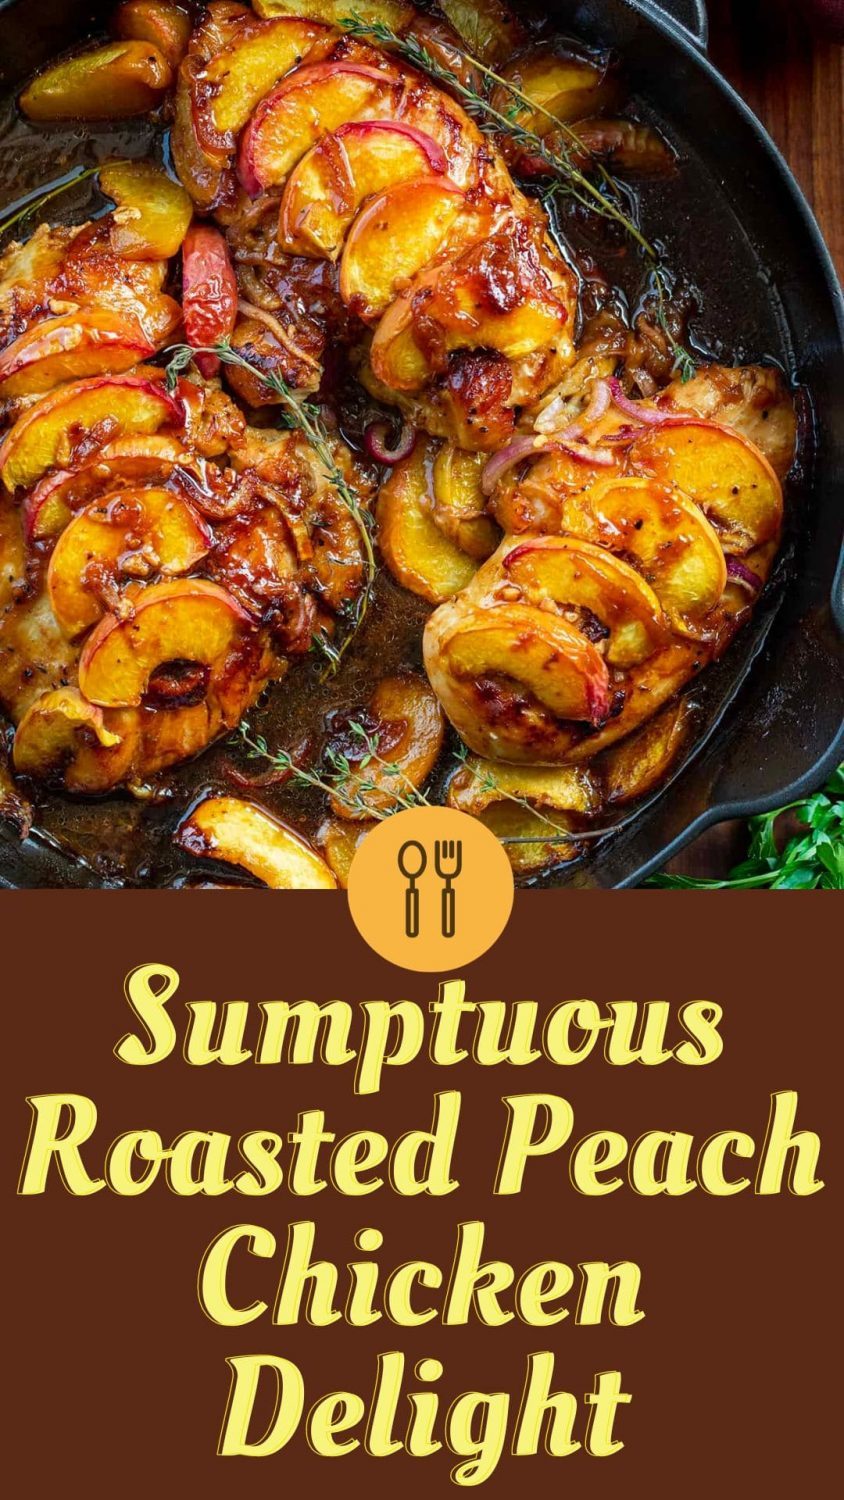 Sumptuous Roasted Peach Chicken Delight